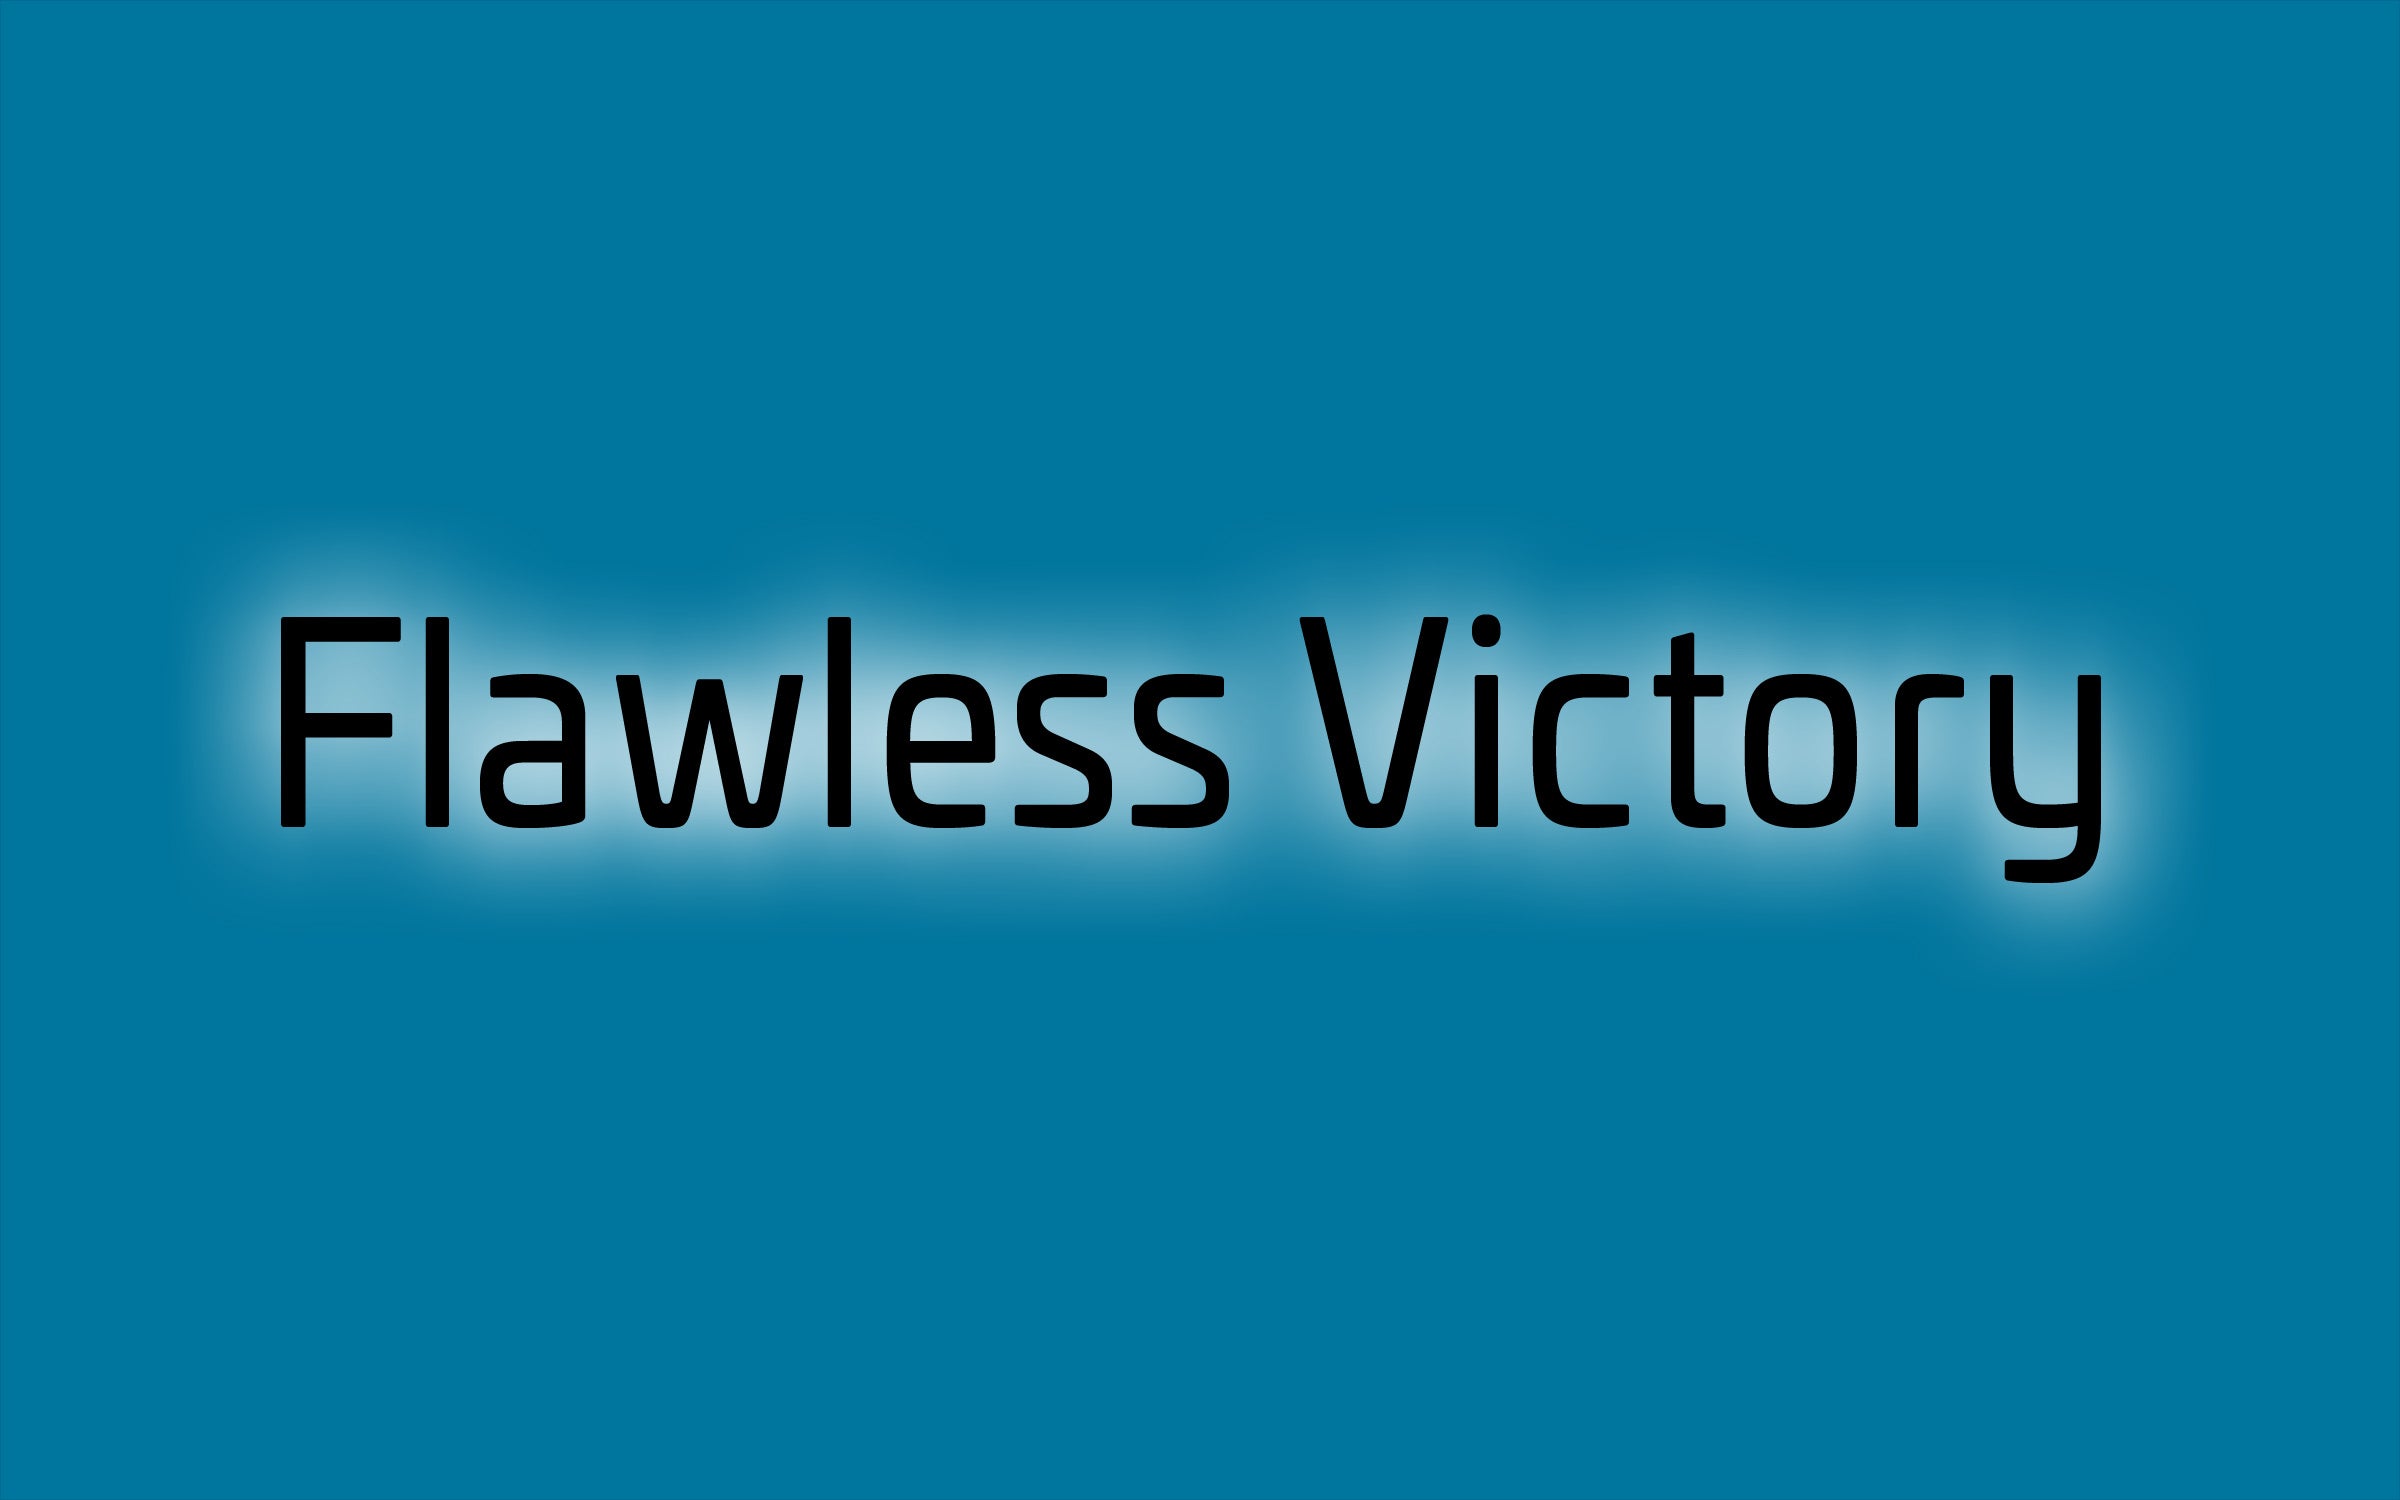 How to pronounce flawless victory